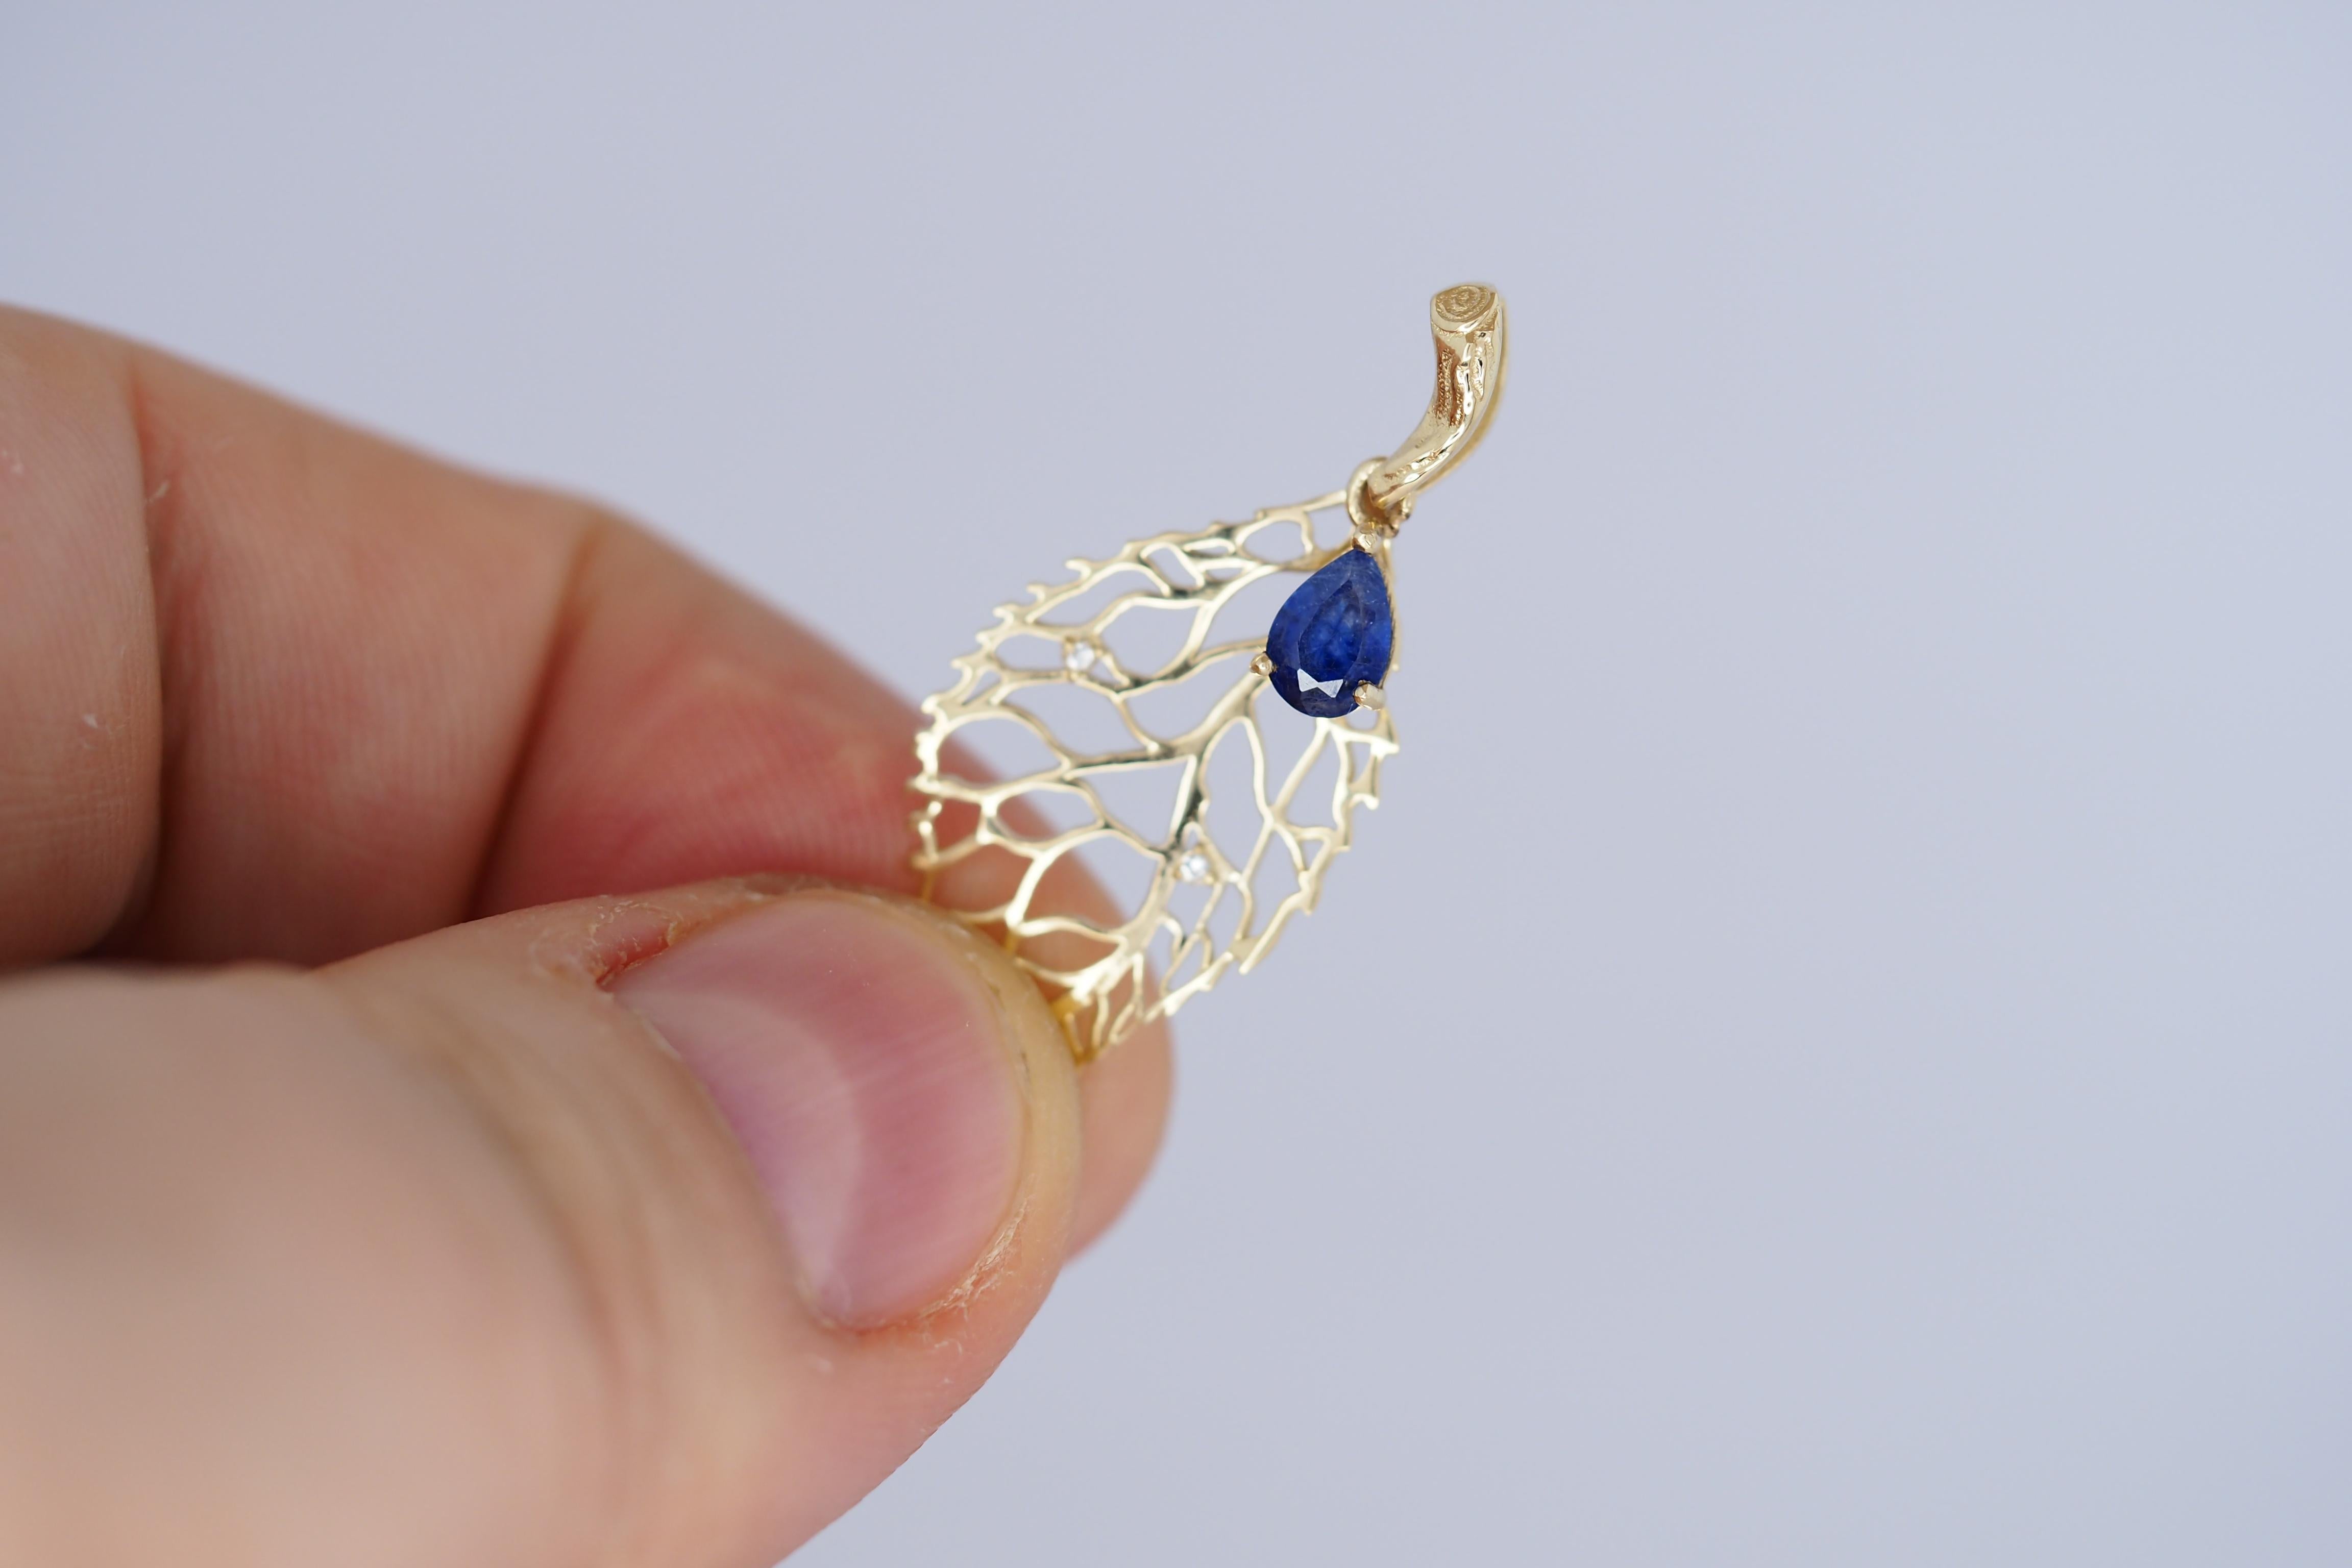 14k gold leaf pendant with sapphire and diamonds. Floral gold pendant.

Weight: 1.2 g.
Gold - 14k gold
Pendant size: 37 х 14.86 mm.
Central stone: Natural sapphire
Cut: Pear
Weight: approx 0.7 ct.
Color: Blue (can be little lighter or